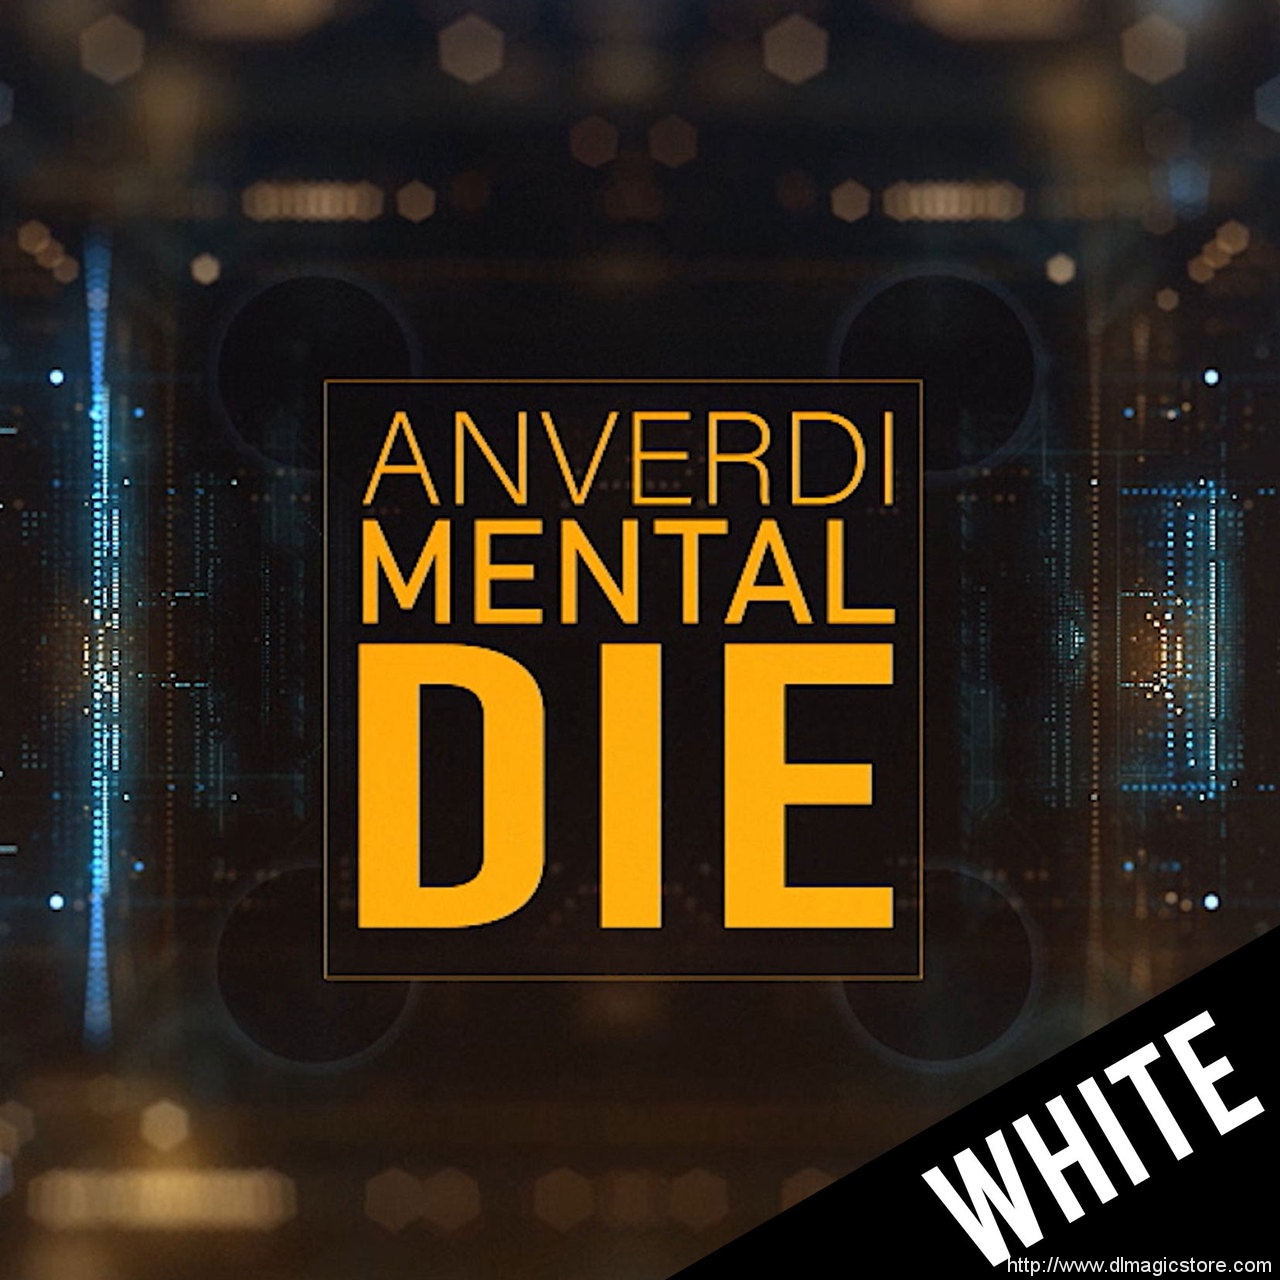 Mental Die by Tony Anverdi (Gimmick Not Included)